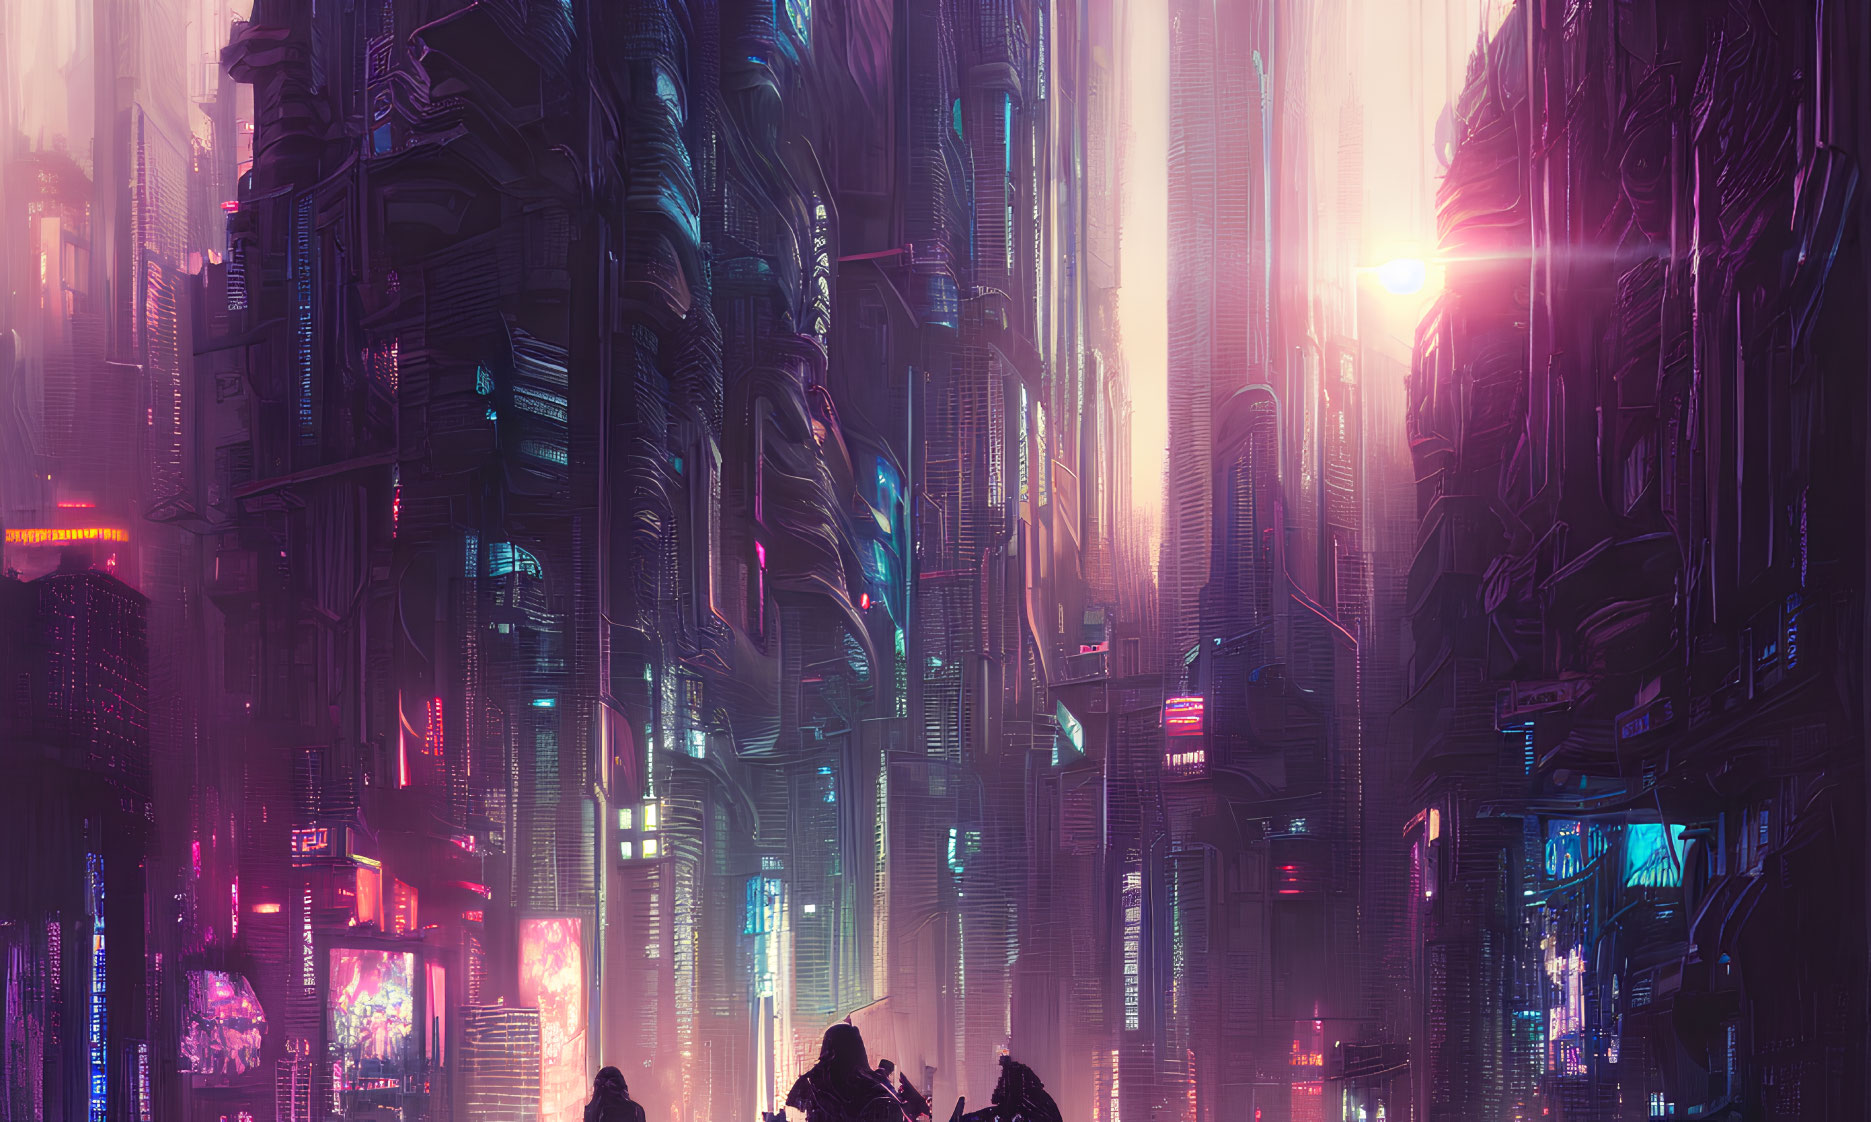 Neon-lit cyberpunk cityscape: towering skyscrapers, glowing signs, flying vehicles in